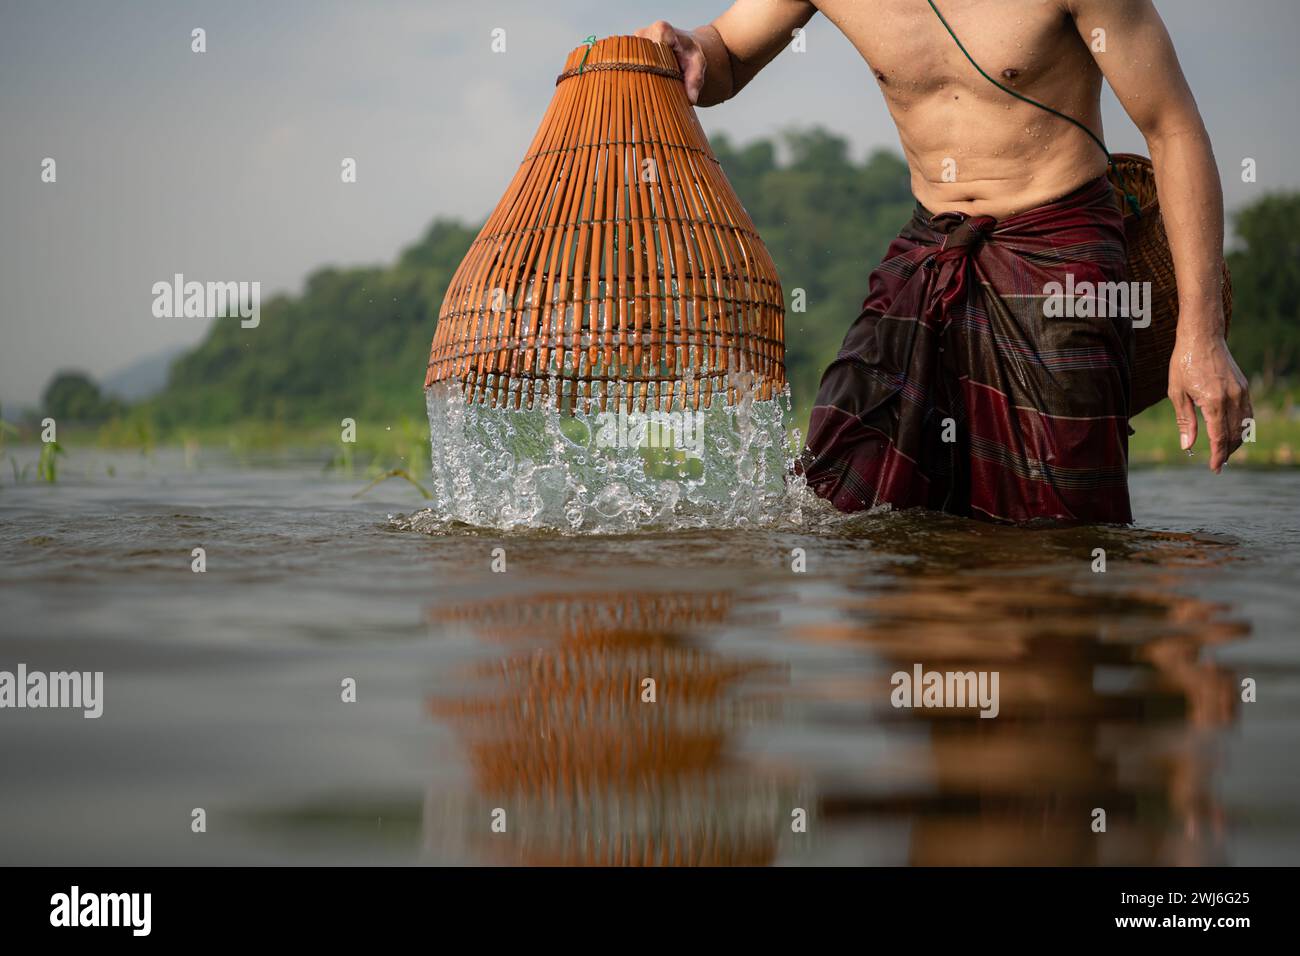 https://c8.alamy.com/comp/2WJ6G25/fisherman-using-traditional-fishing-gear-to-catch-fish-for-cooking-rural-thailand-living-life-concept-2WJ6G25.jpg